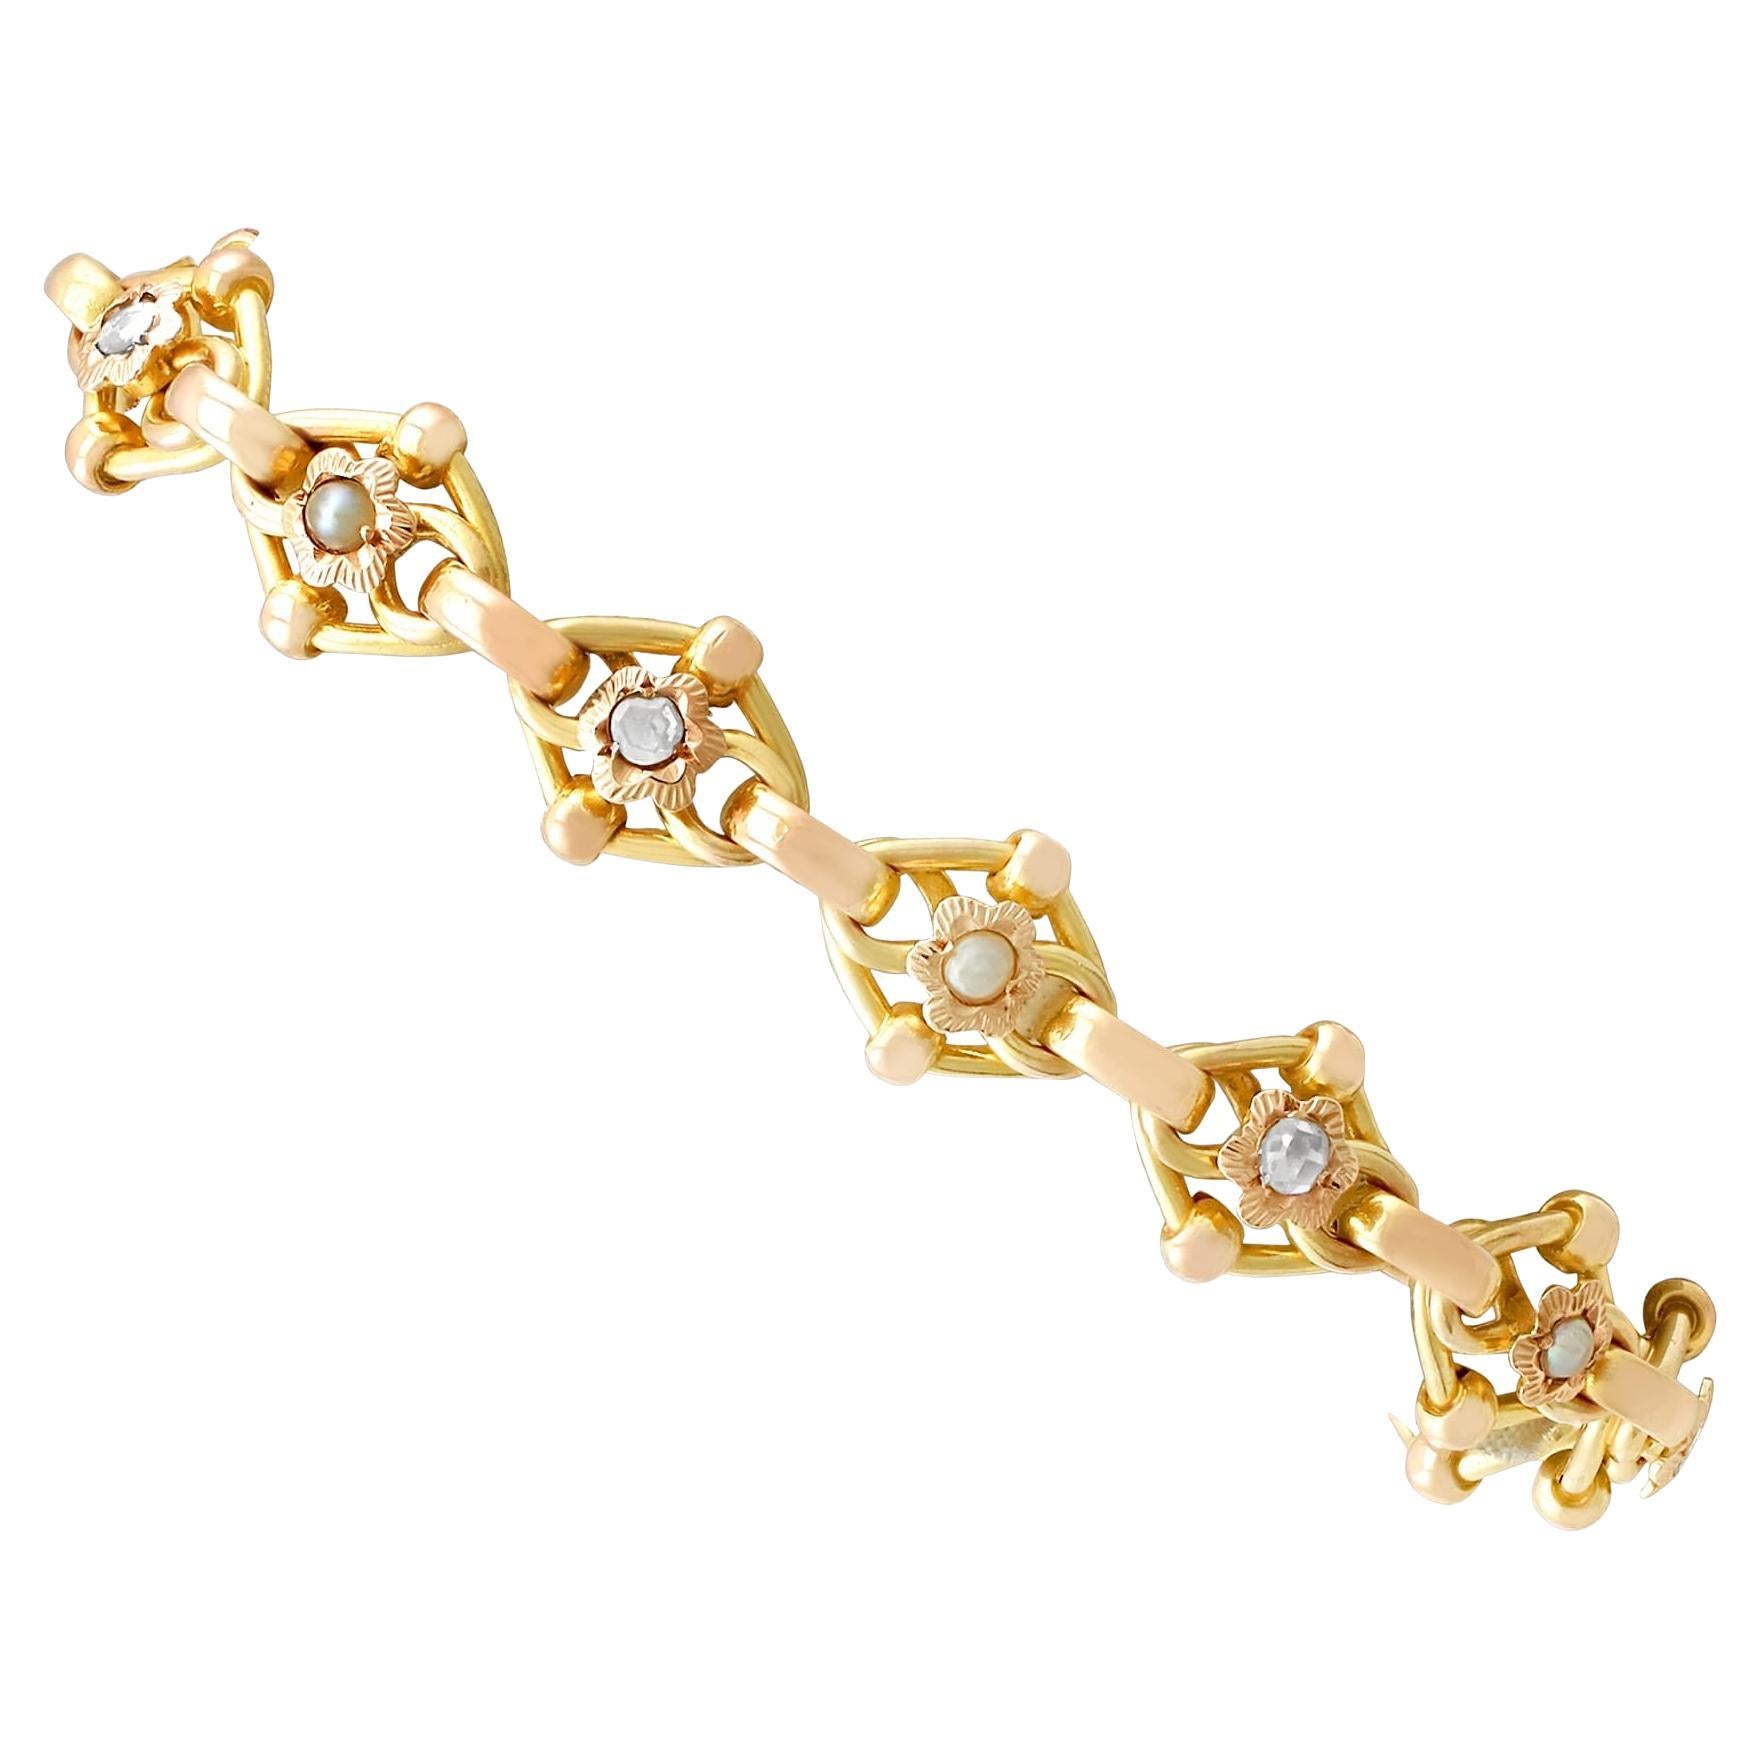 1910s 2.61 Carat Diamond and Seed Pearl Yellow Gold Bracelet